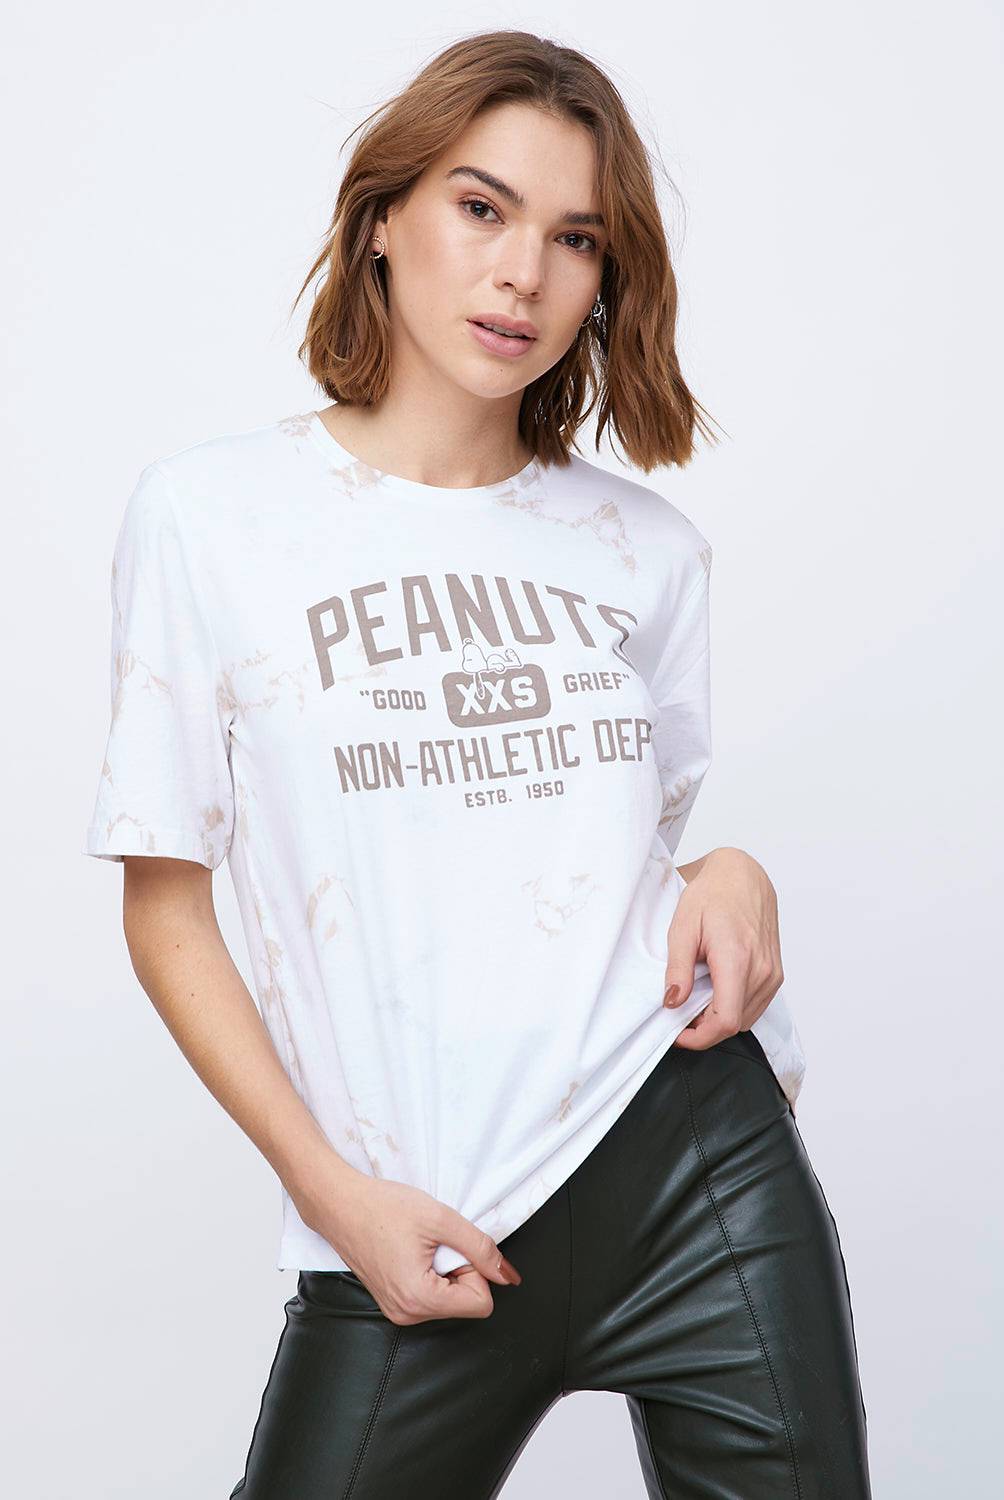 ONLY - Only Polera Manga Corta Licencia Snoopy Mujer